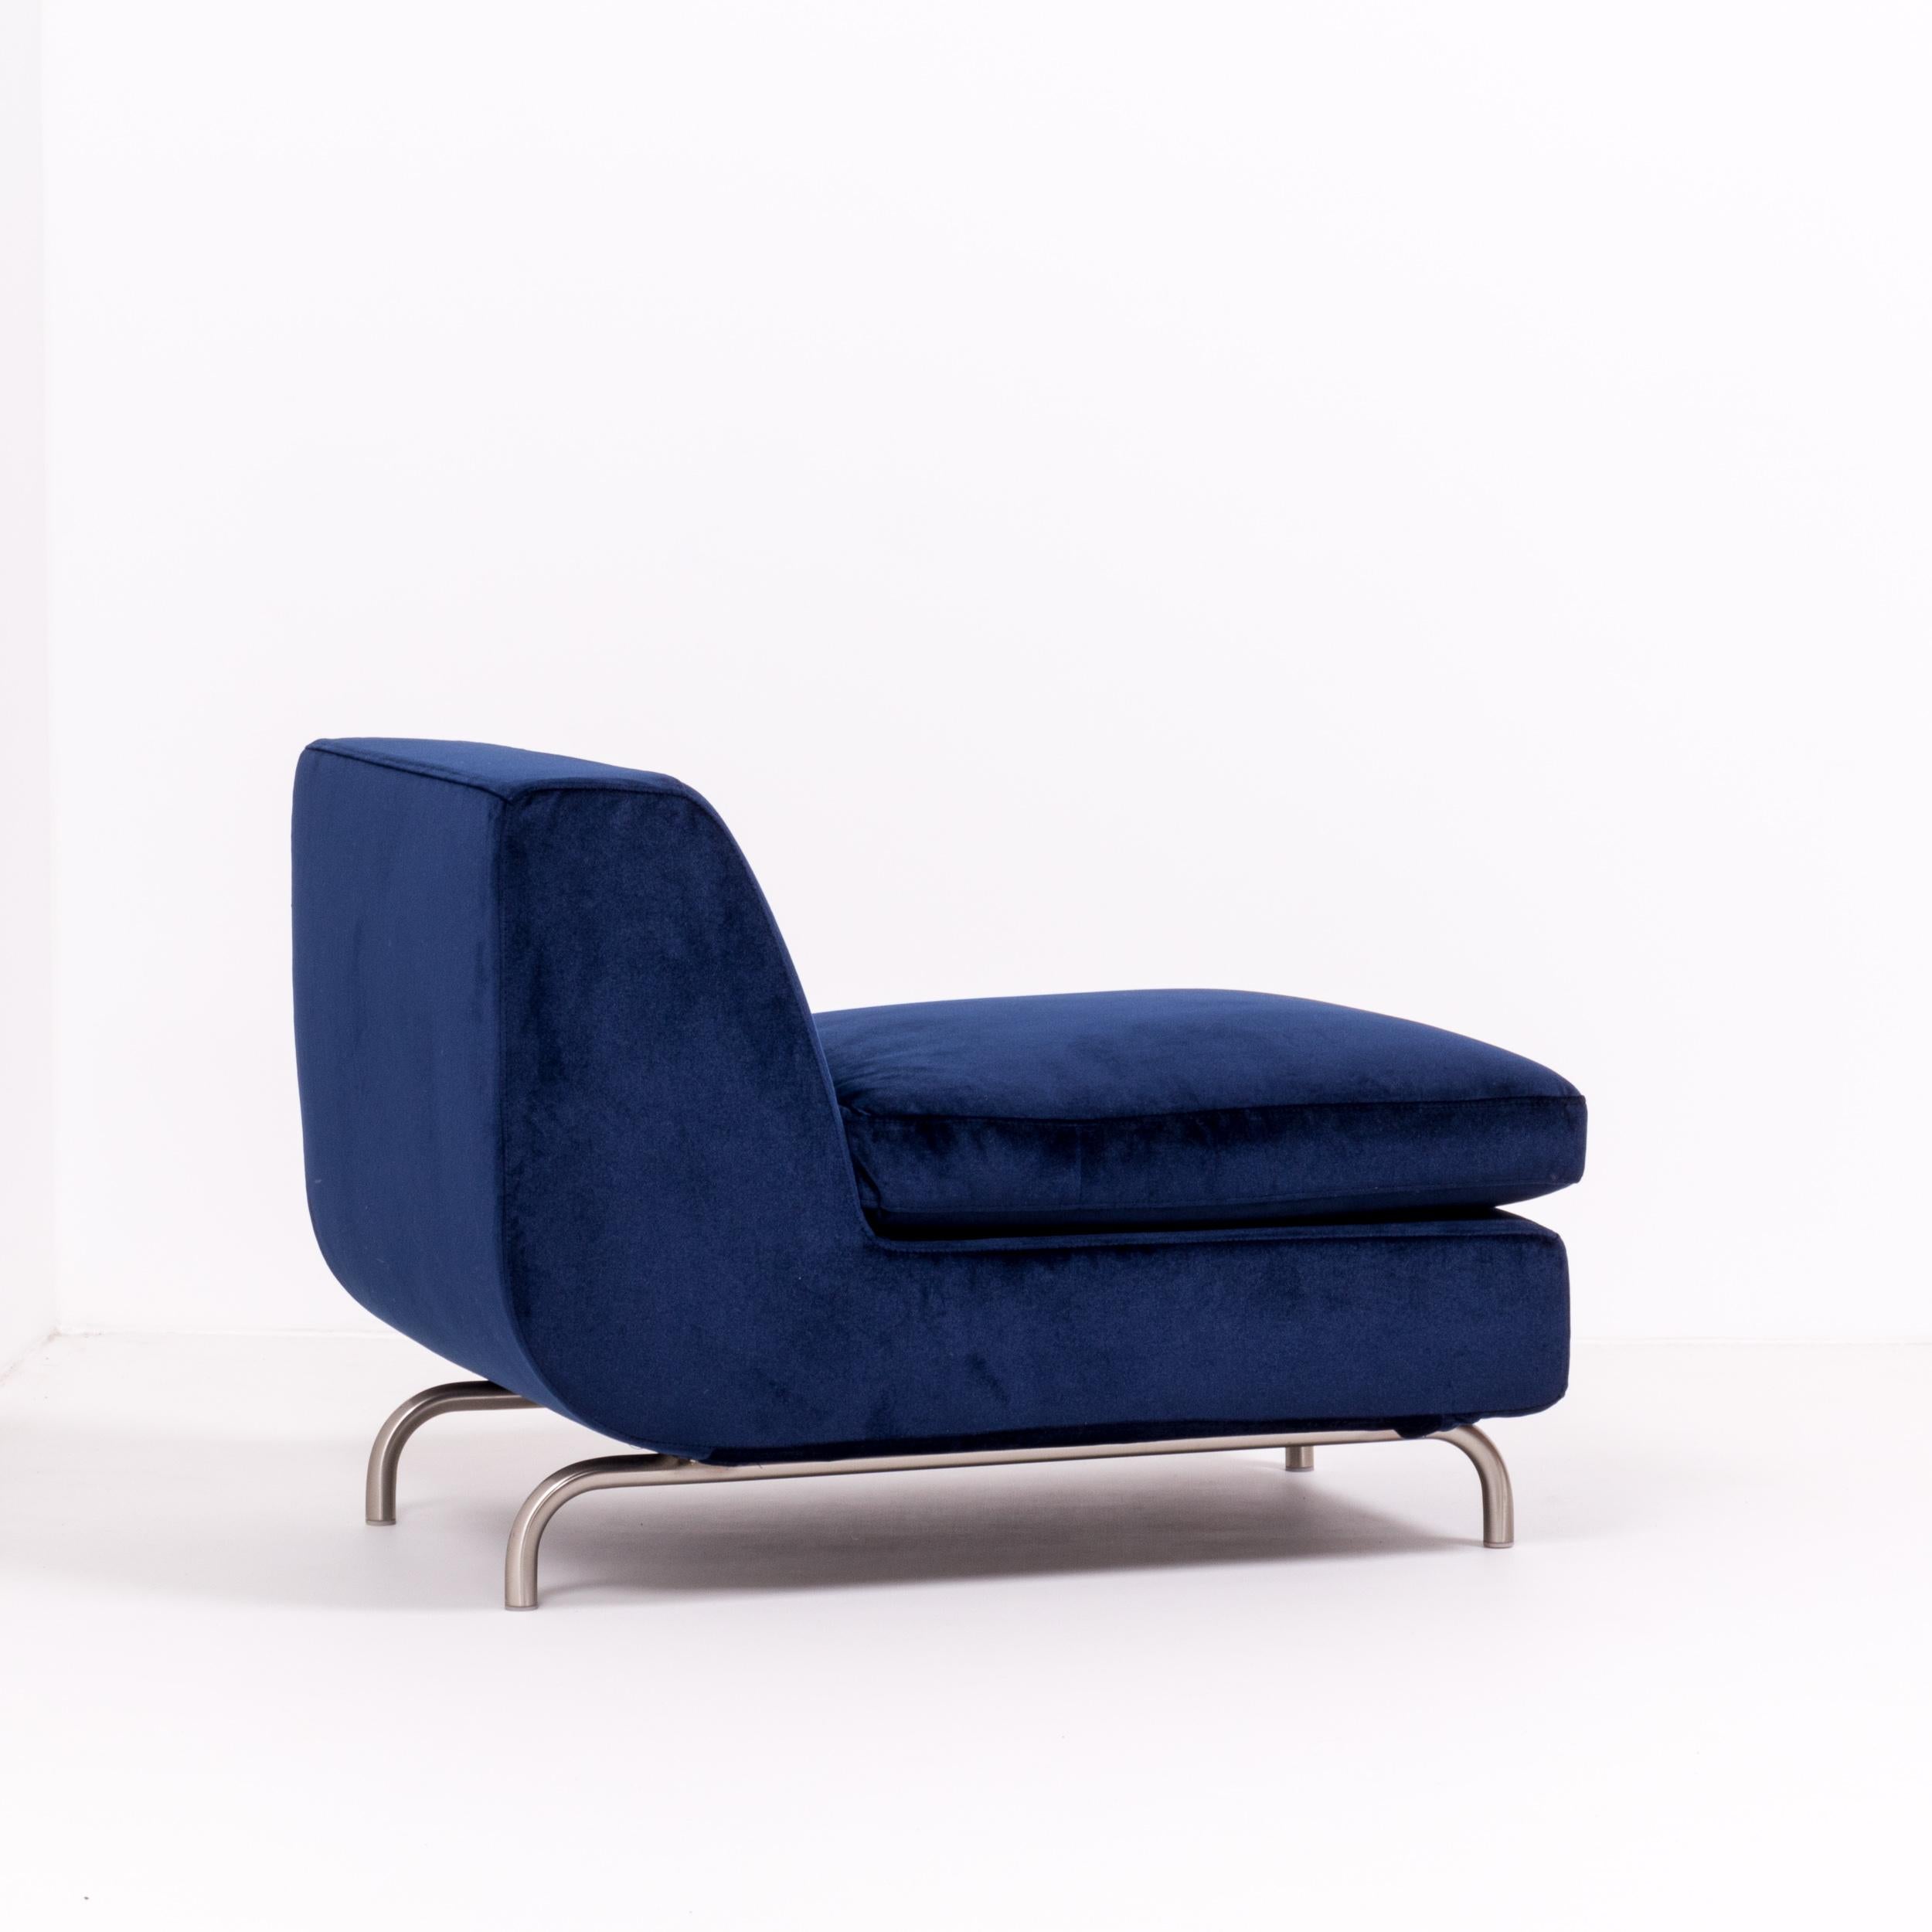 Minotti by Rodolfo Dordoni Dubuffet Navy Blue Lounge Chairs, Set of 2 In Good Condition In London, GB